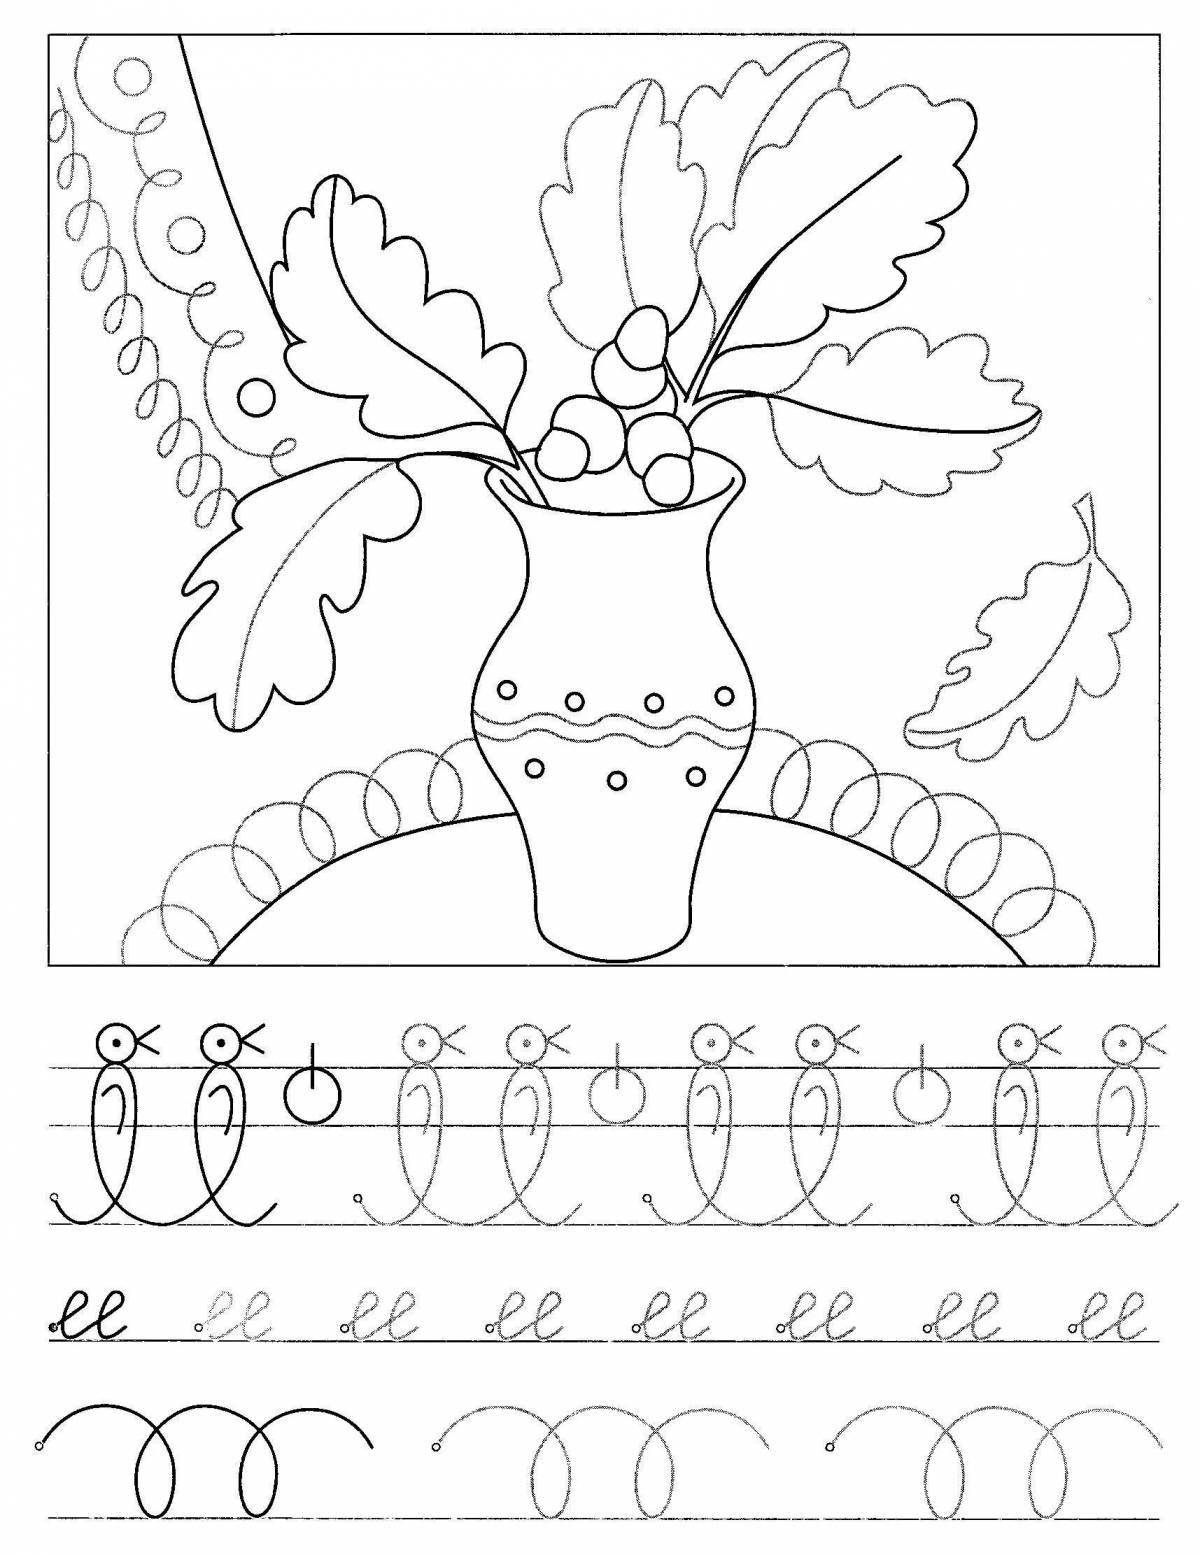 Colorful coloring book for the development of fine motor skills in children 6-7 years old